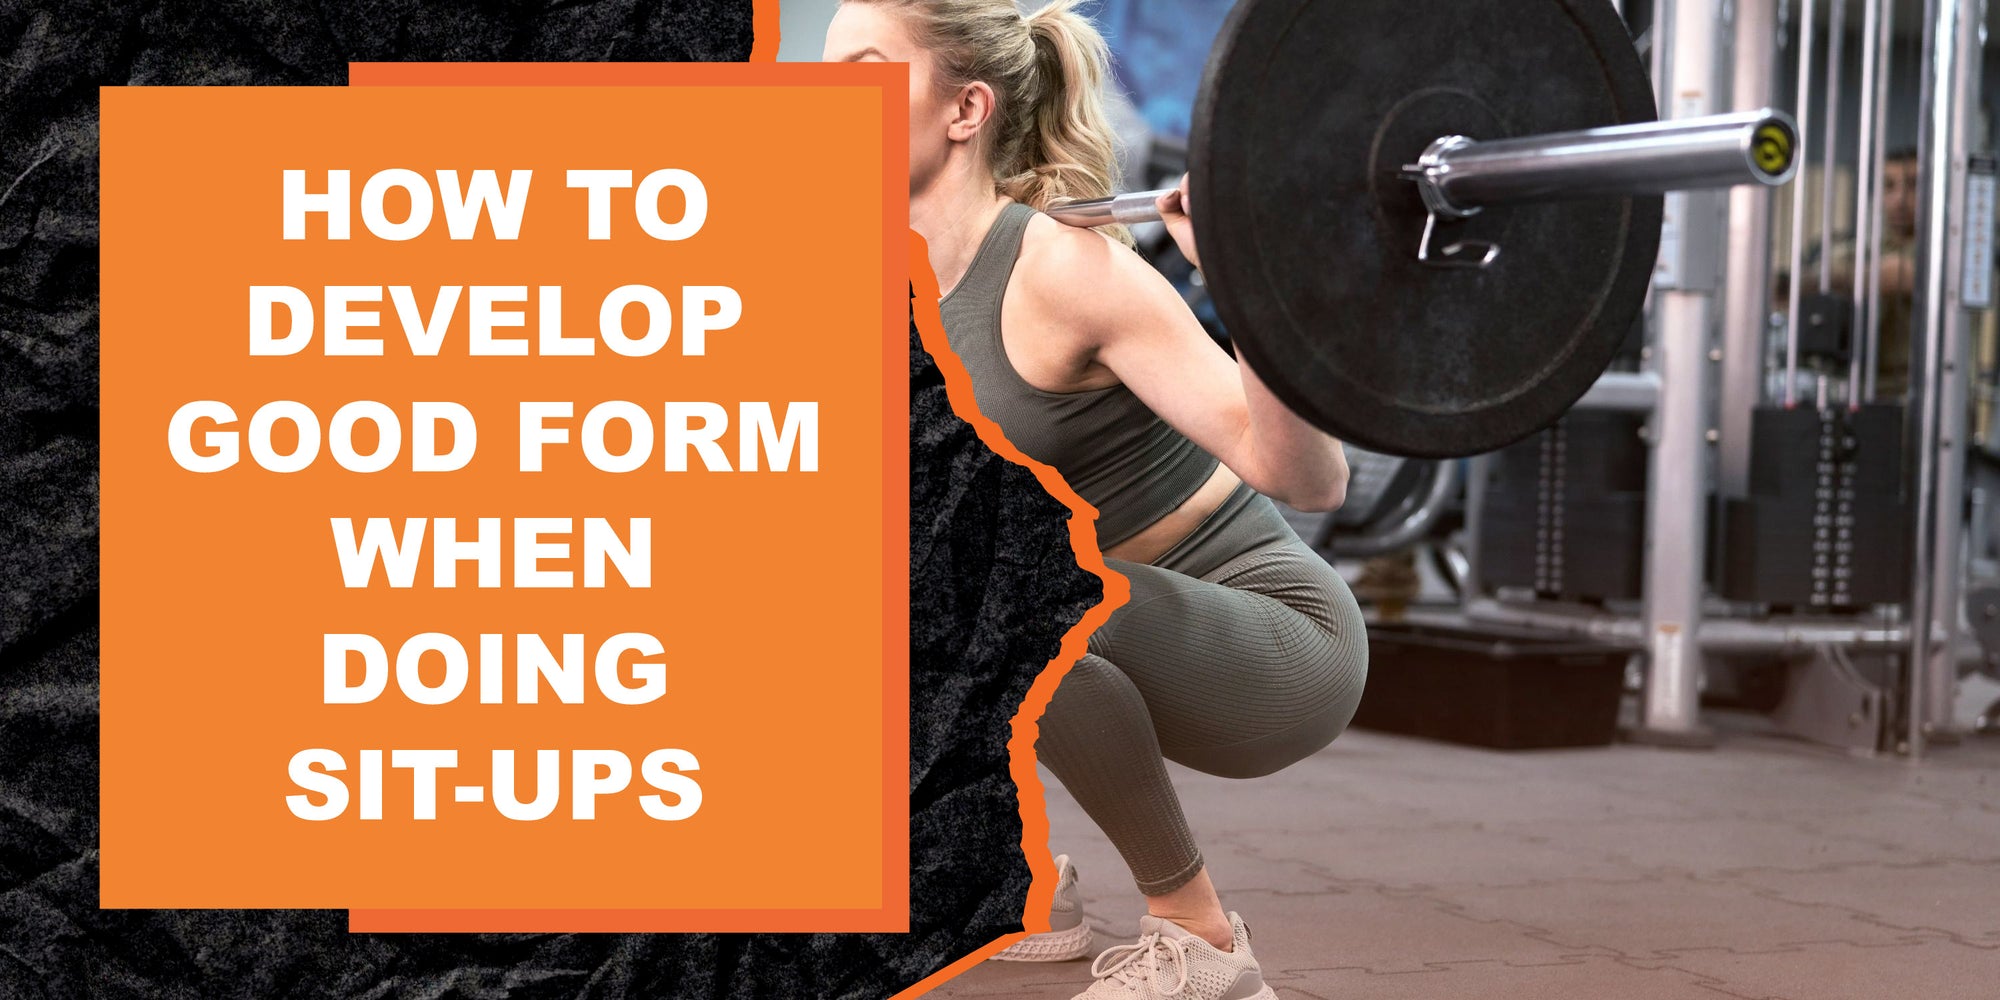 How to Develop Good Form When Doing Sit-Ups